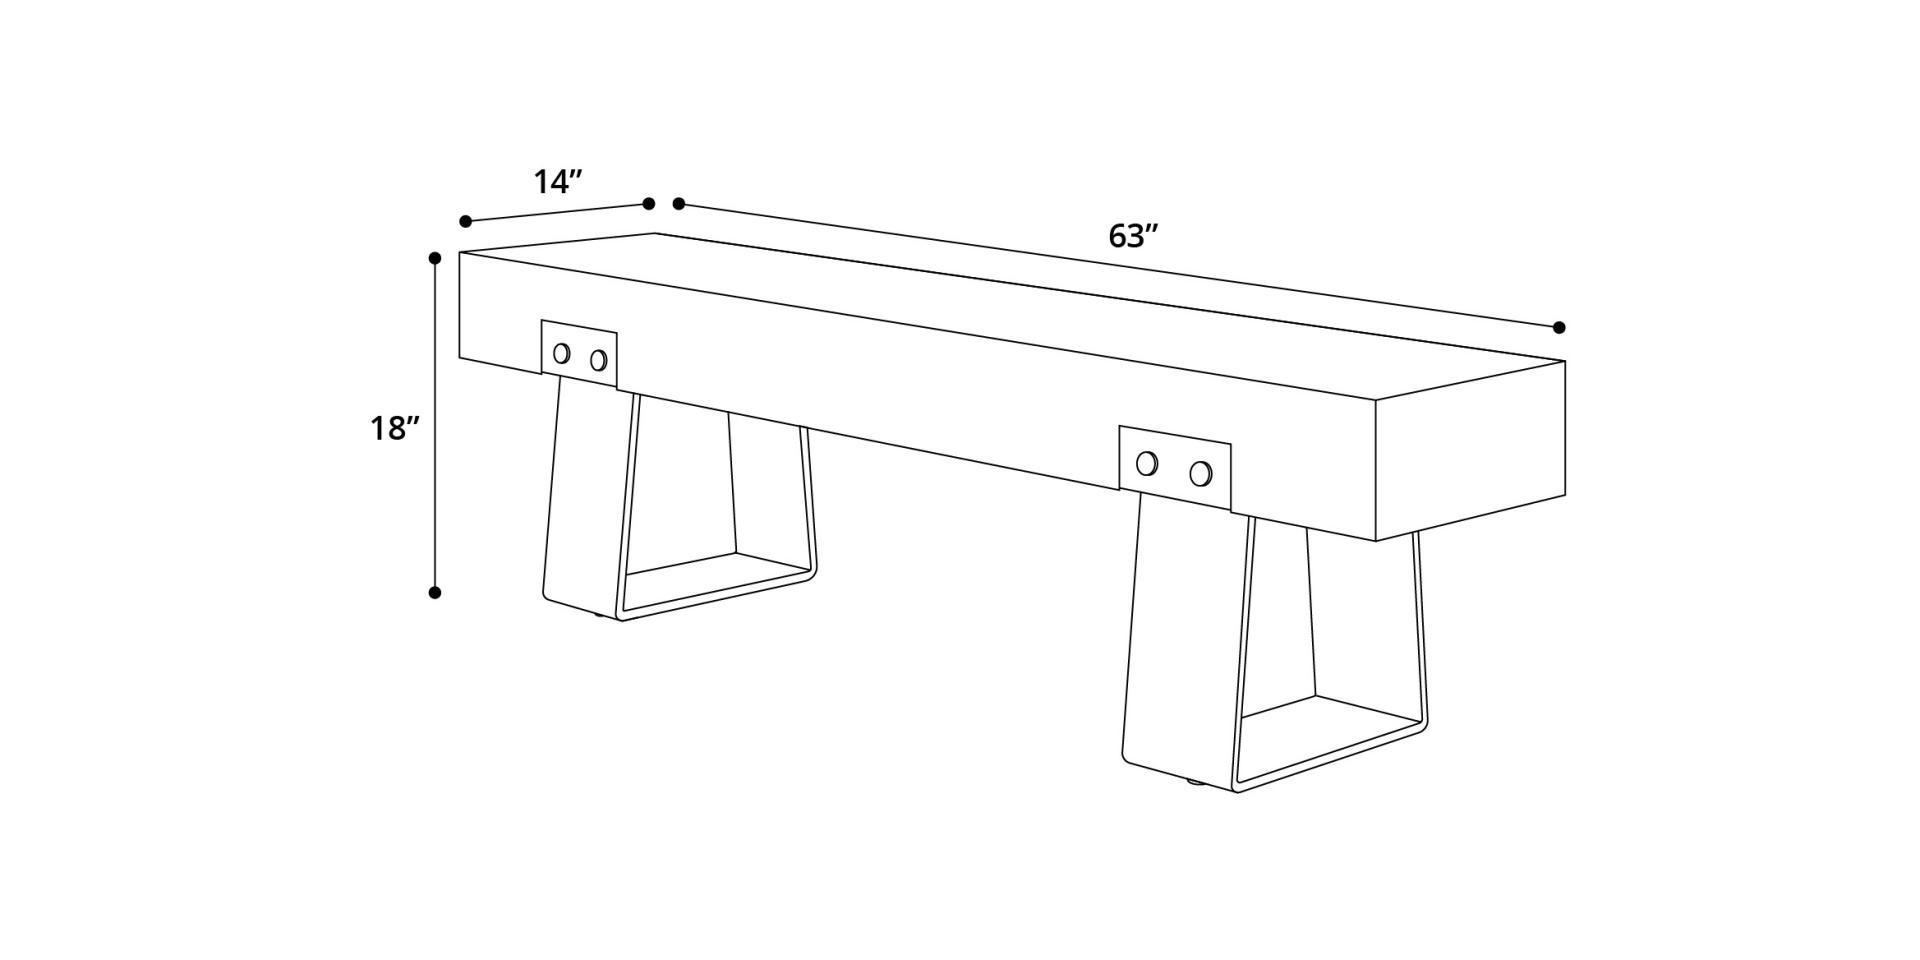 Chrystie Bench Dimensions